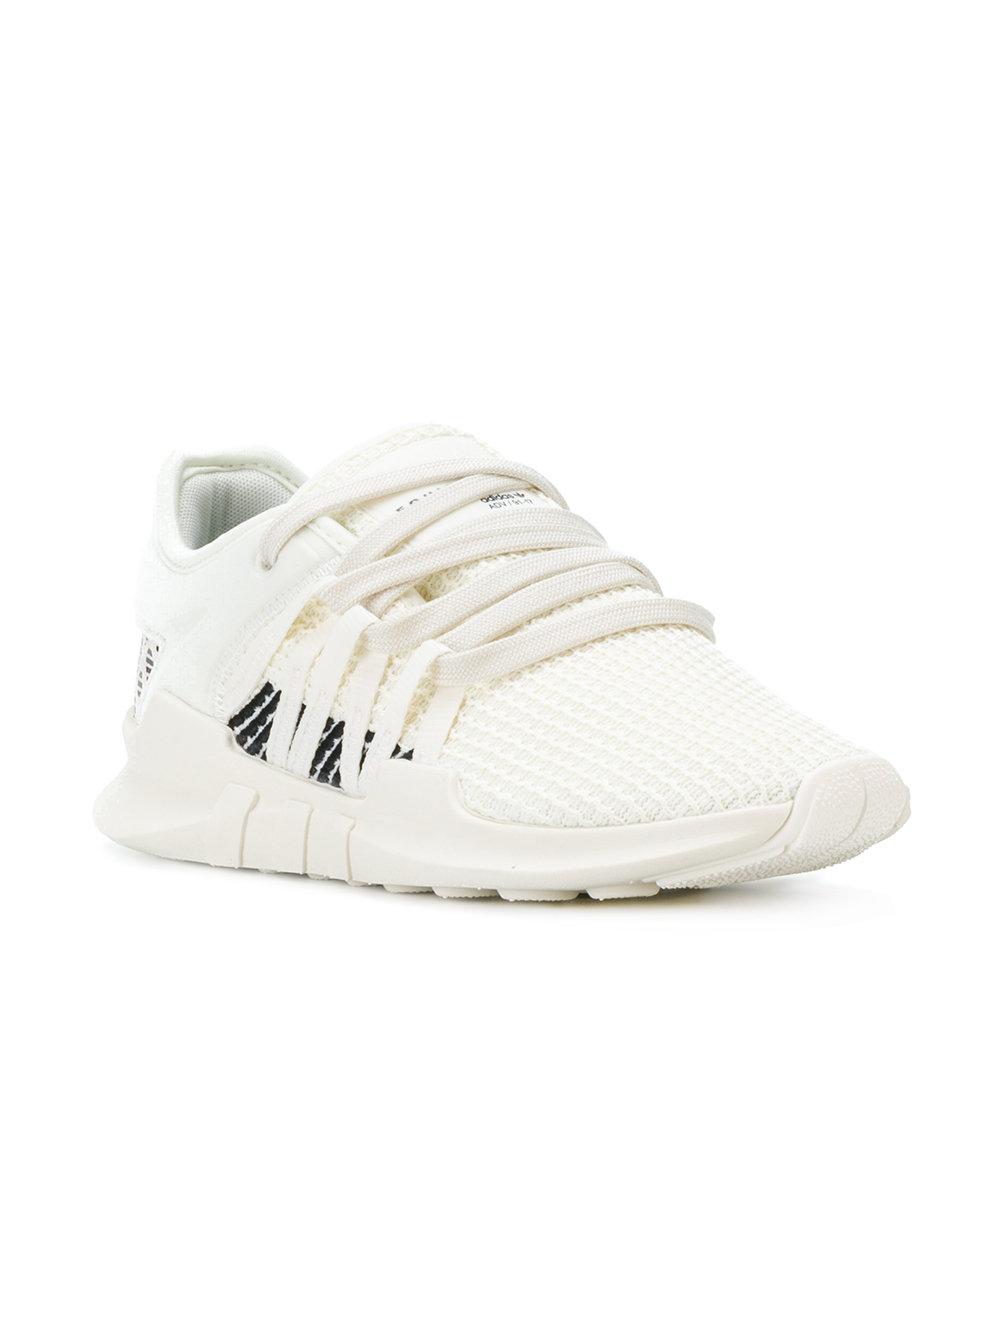 adidas Synthetic Originals Eqt Racing Adv 91/17 Sneakers in White | Lyst